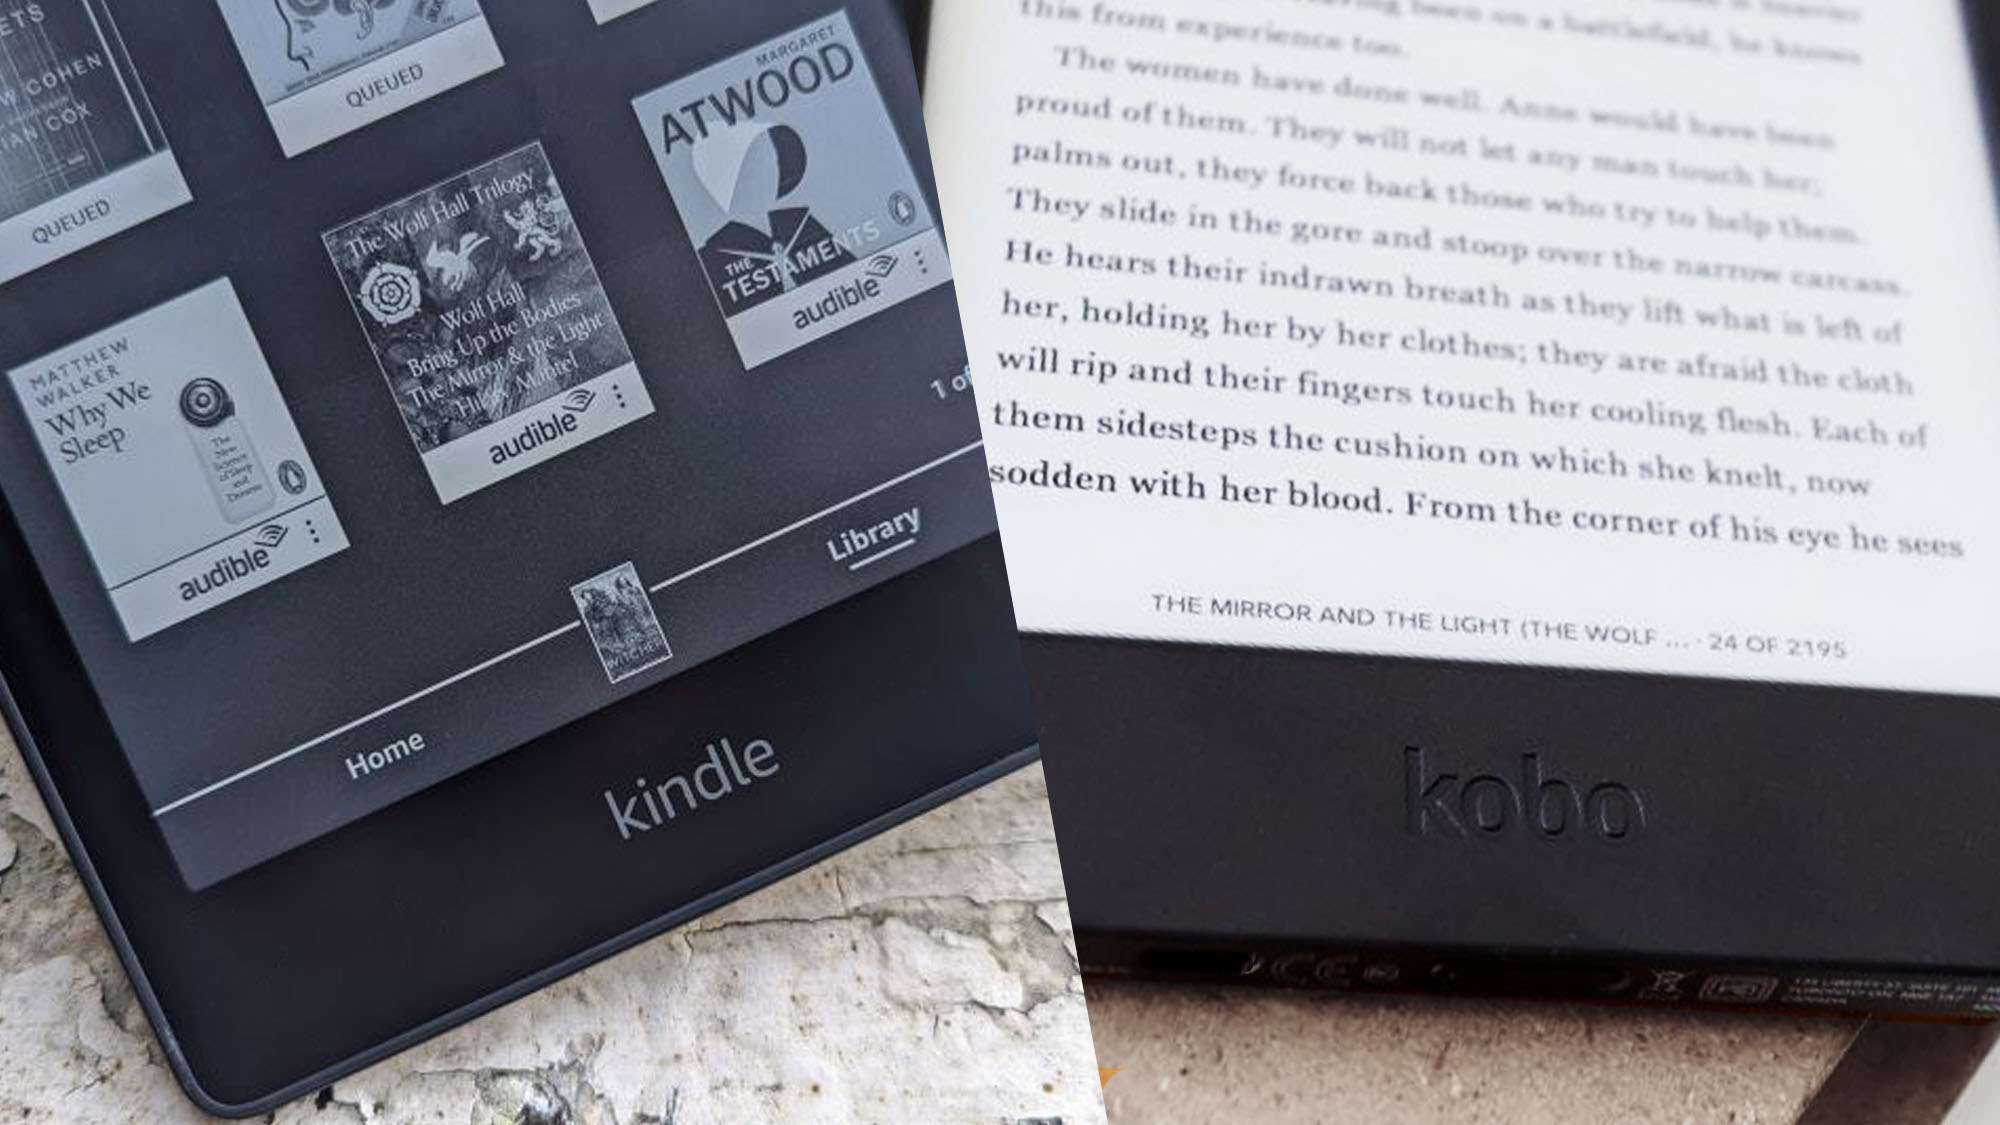 All-new Kindle review: Front lighting and a better screen